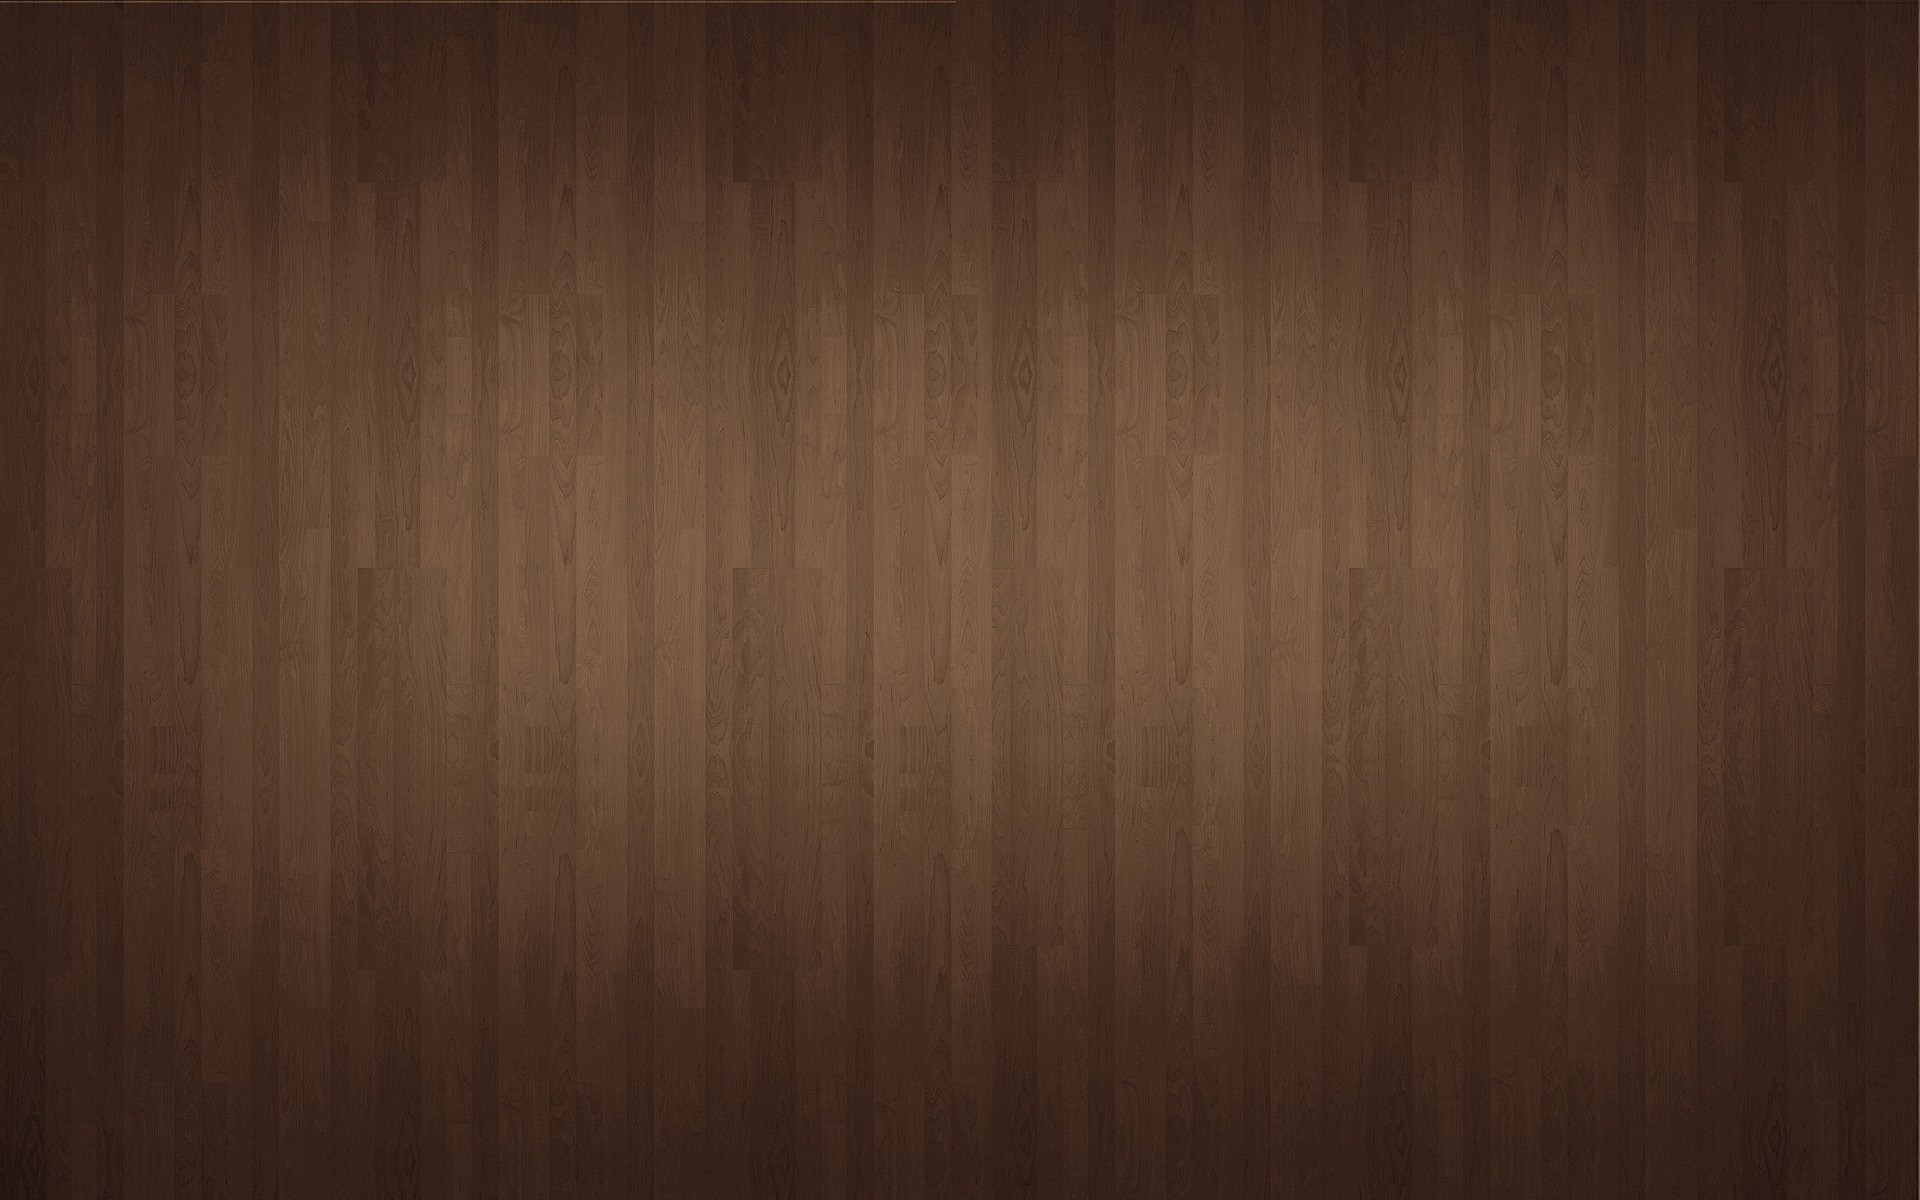 1920x1200 Wood Paneling Wallpaper Compelling Wood Paneling Edmonton Wood Panel Wood  Paneling Effect